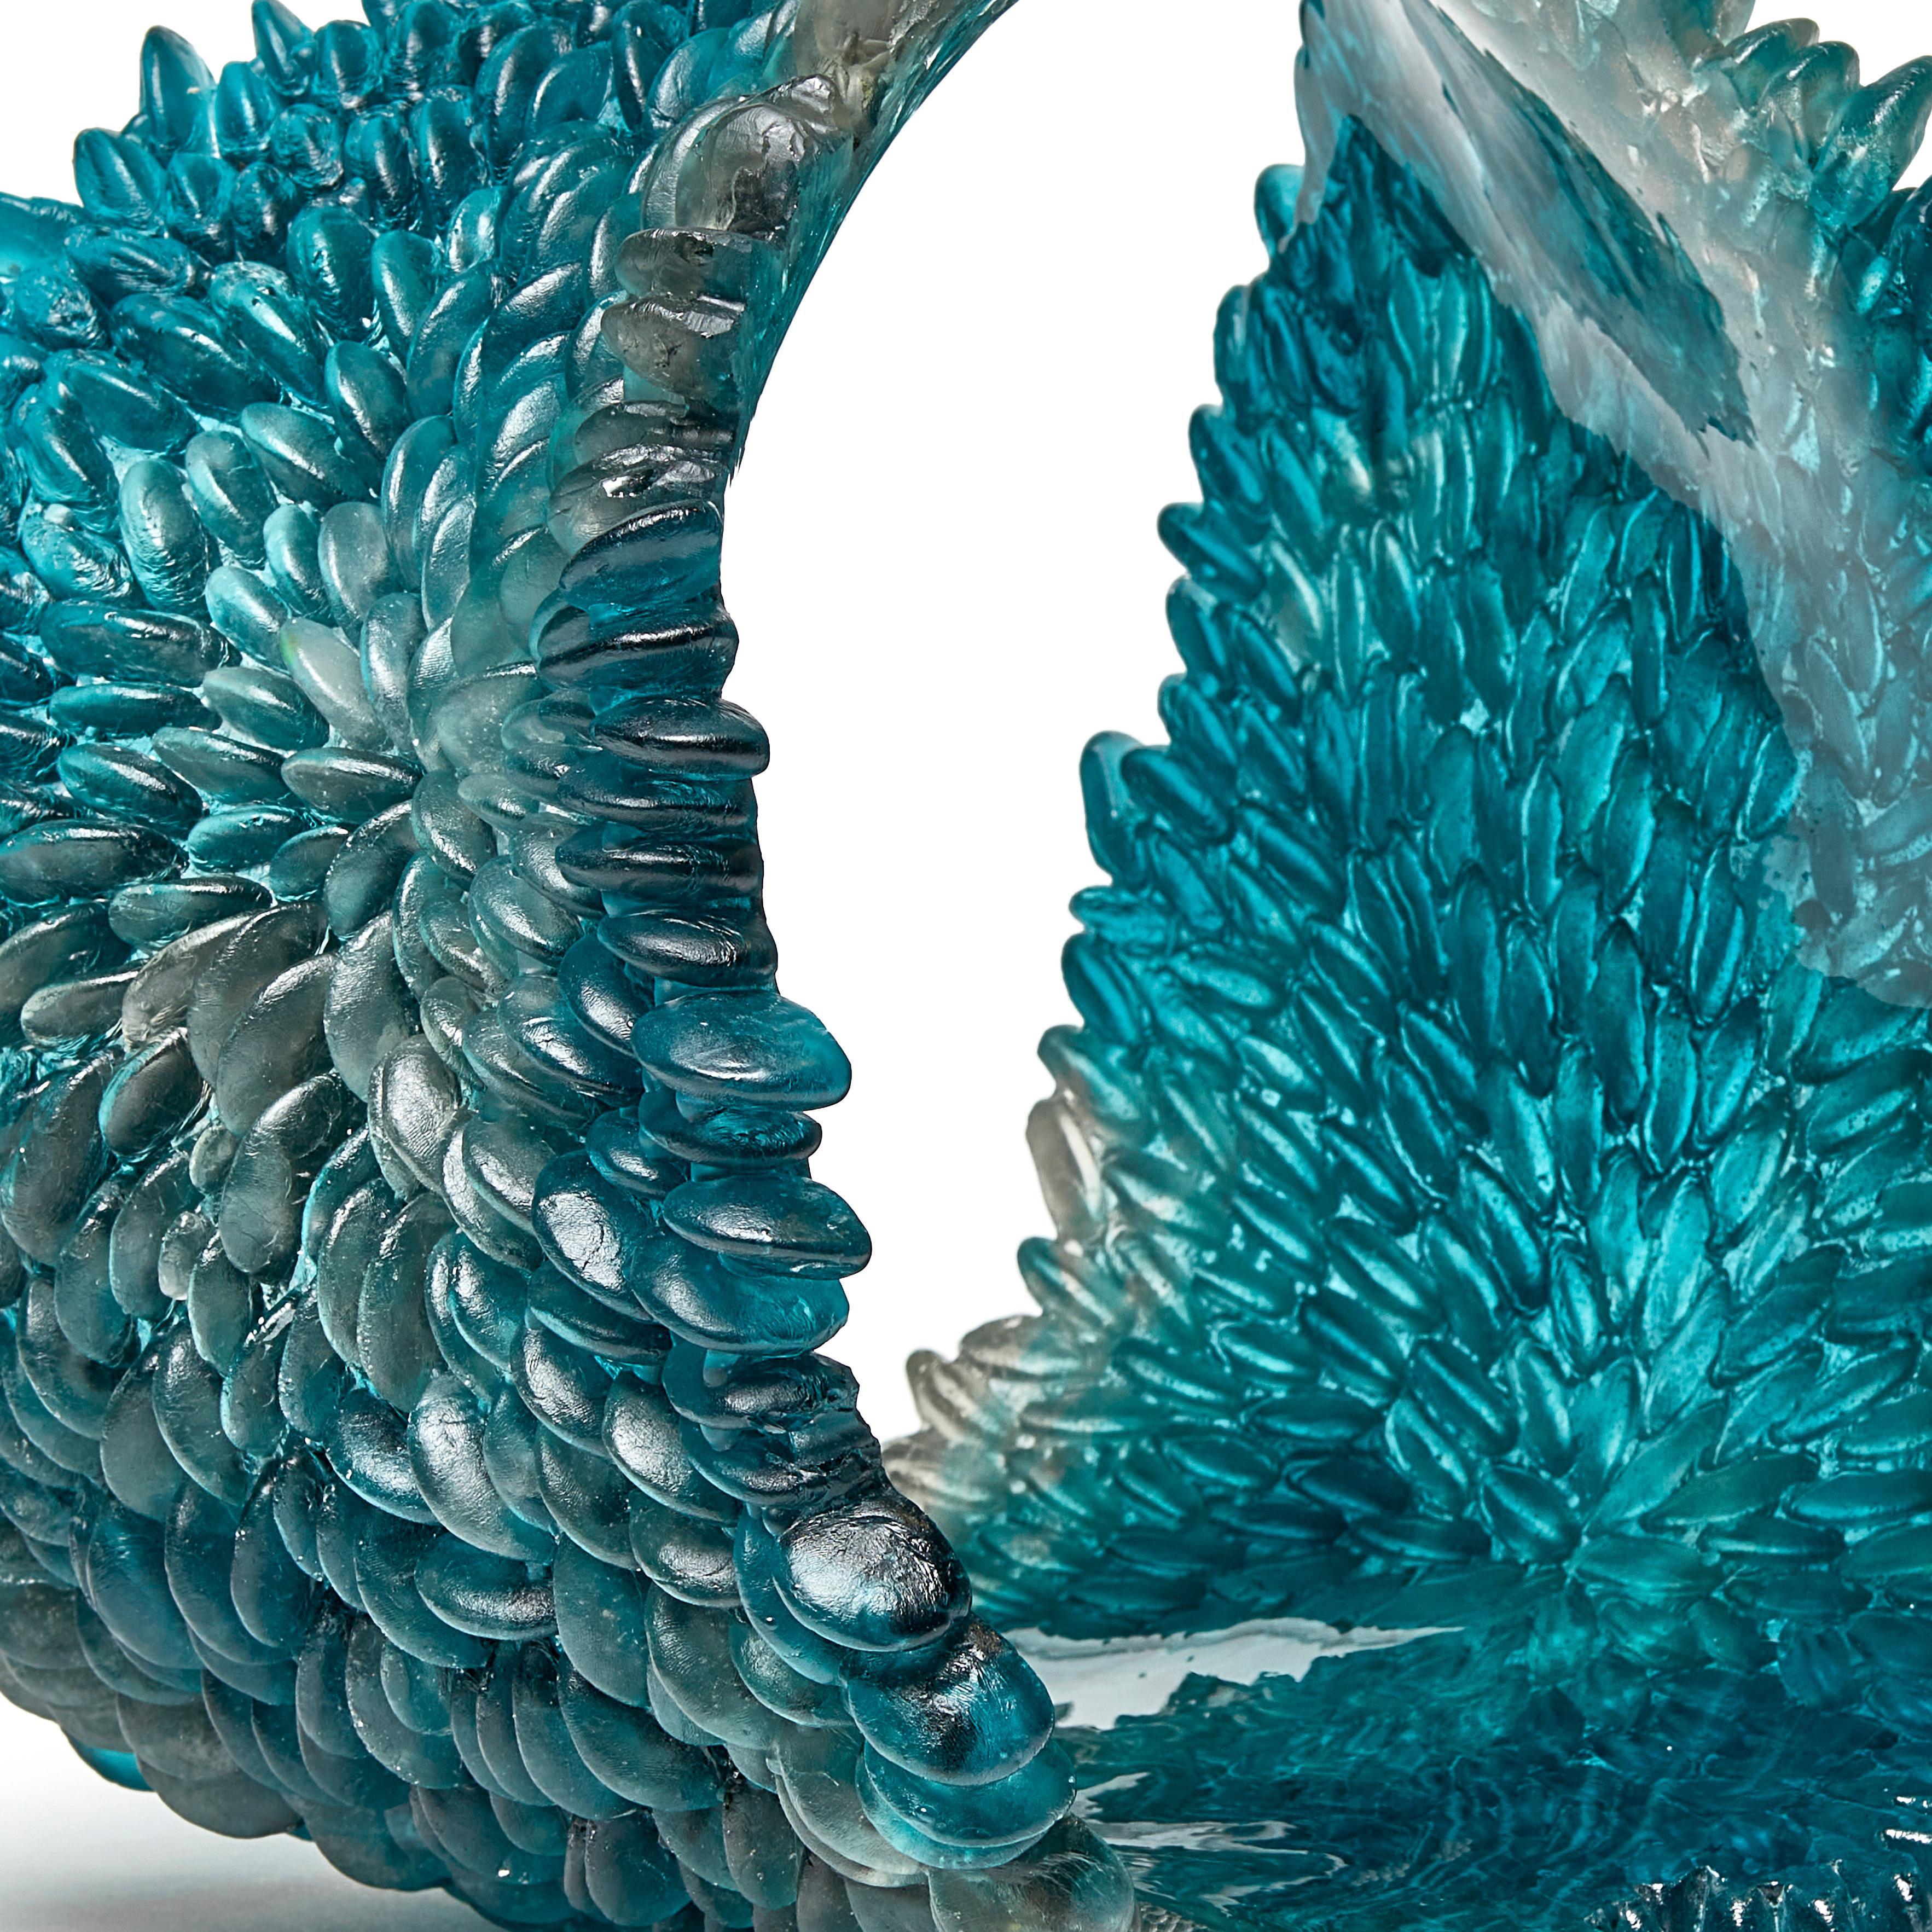 Cast Curled Over IV, Unique Glass Sculpture in teal & grey by Nina Casson McGarva